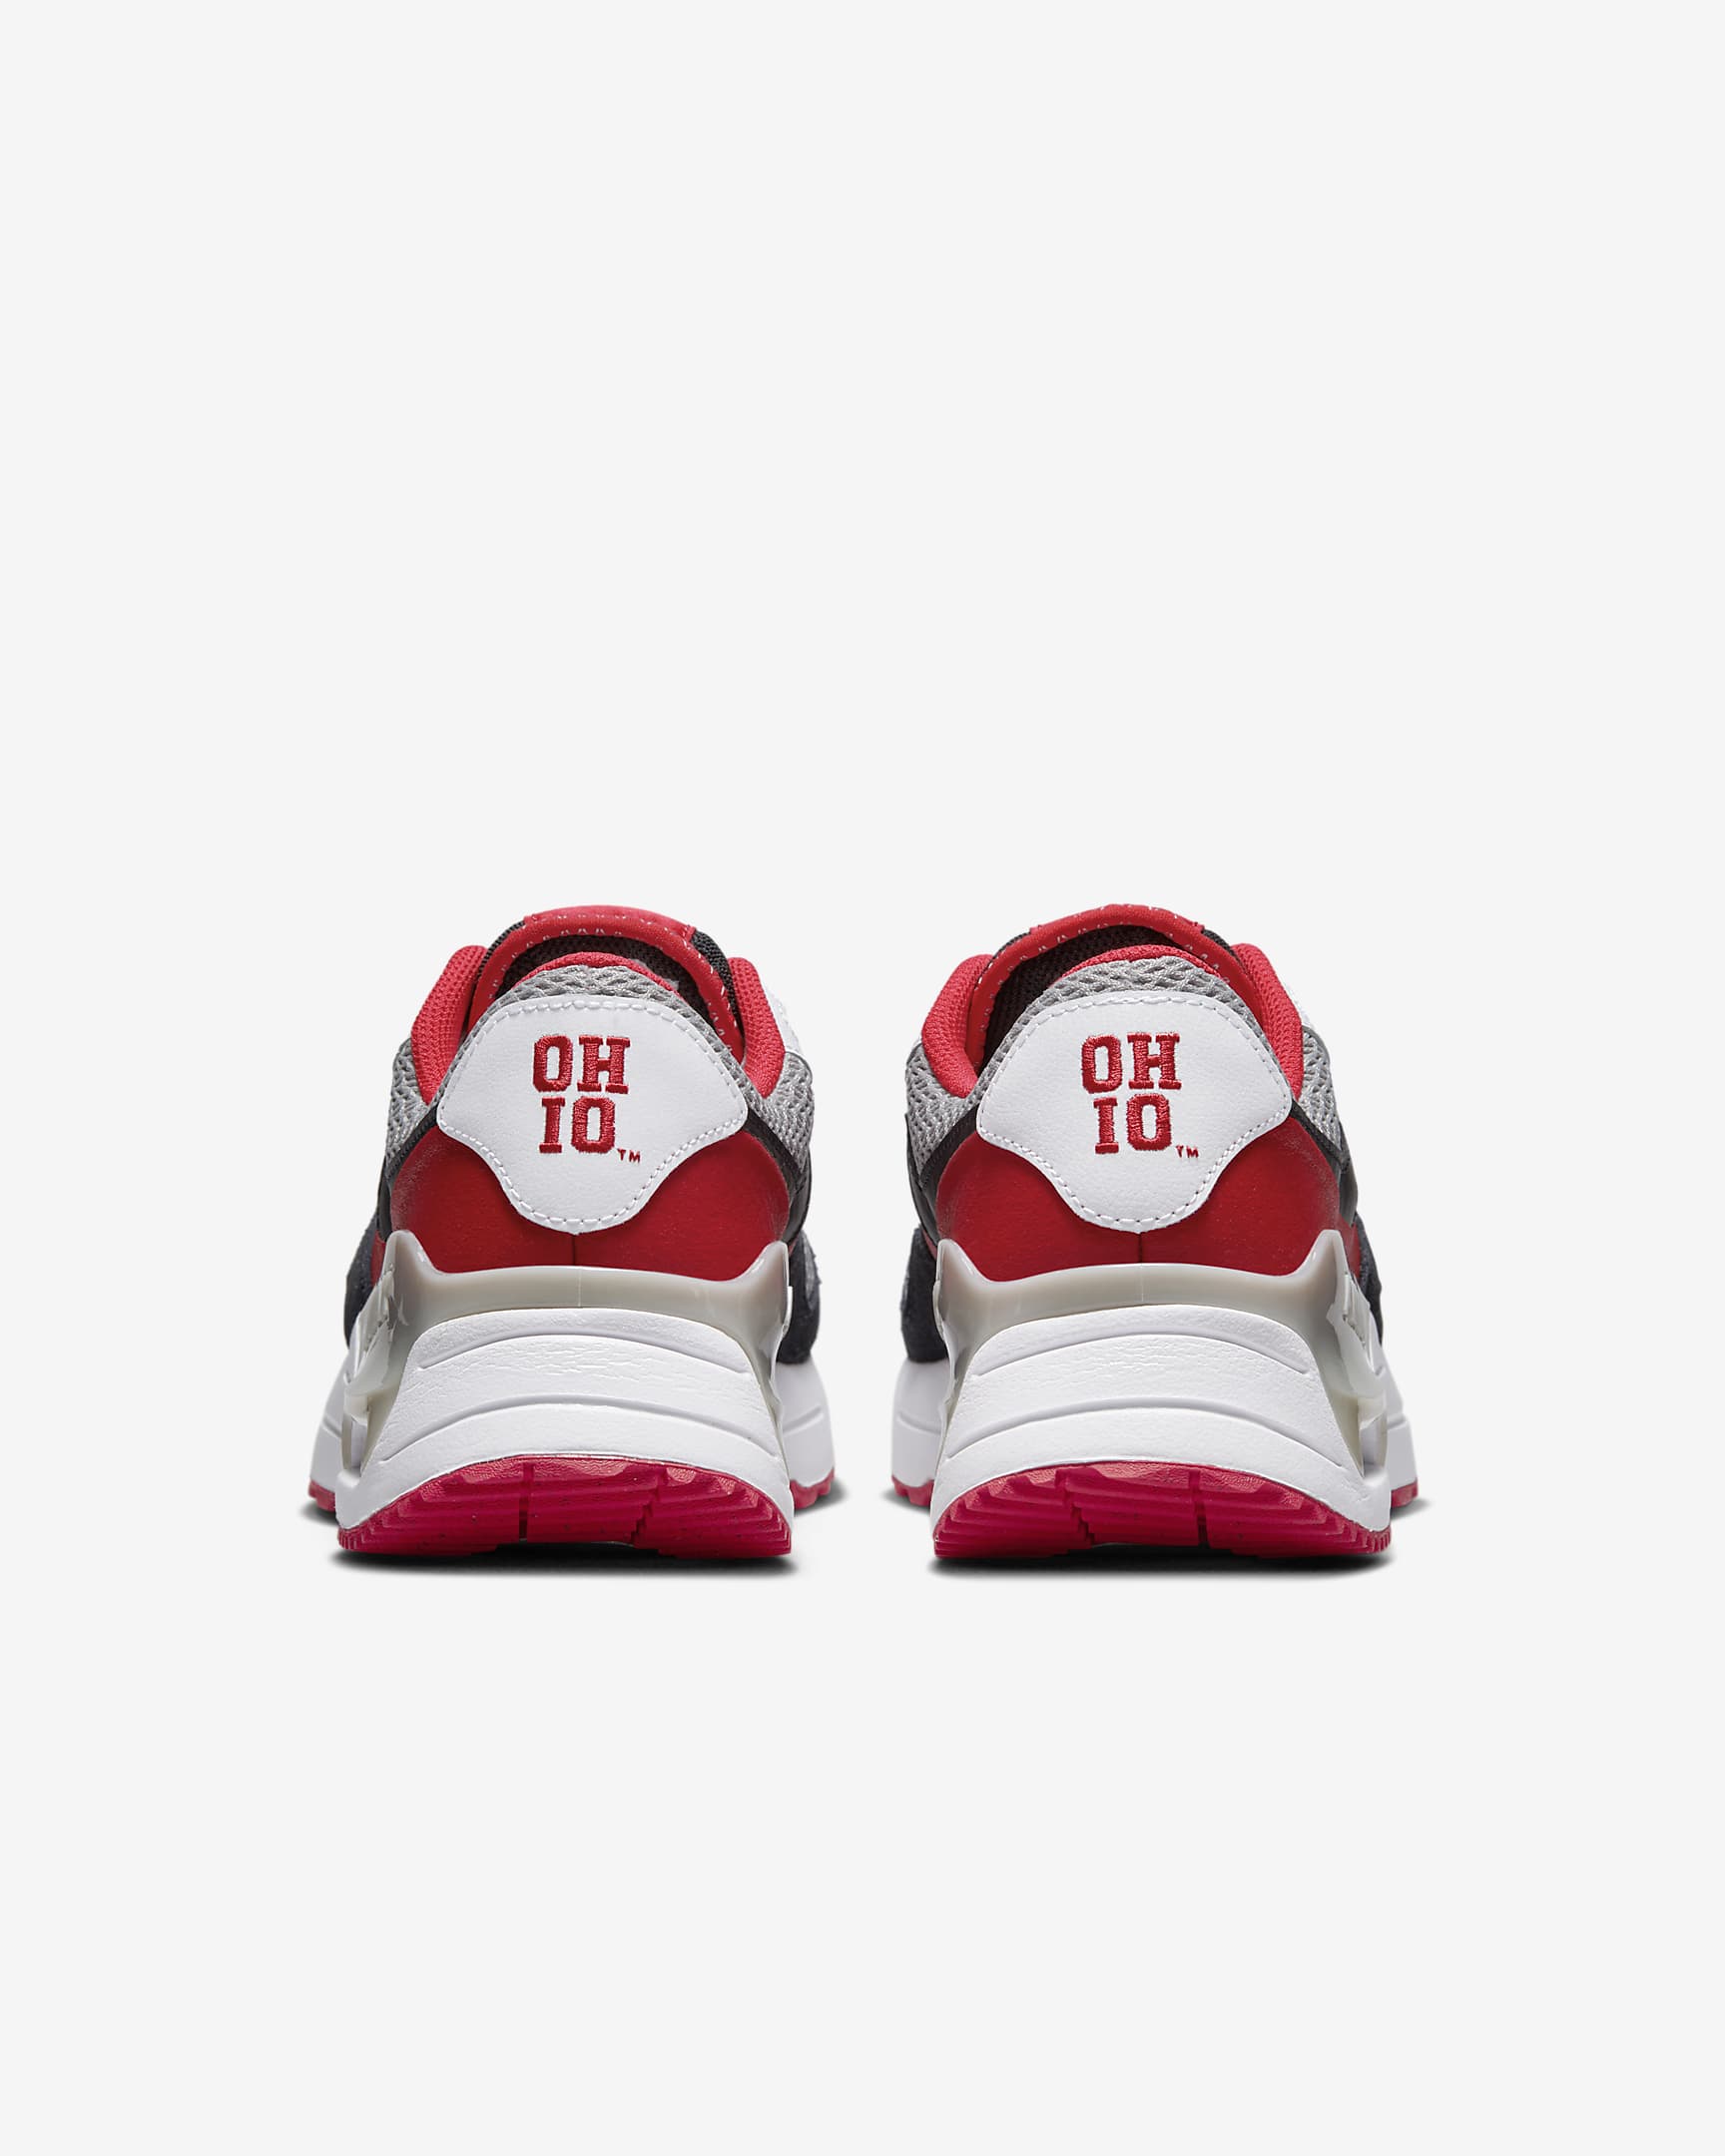 Nike College Air Max SYSTM (Ohio State) Men's Shoes. Nike.com